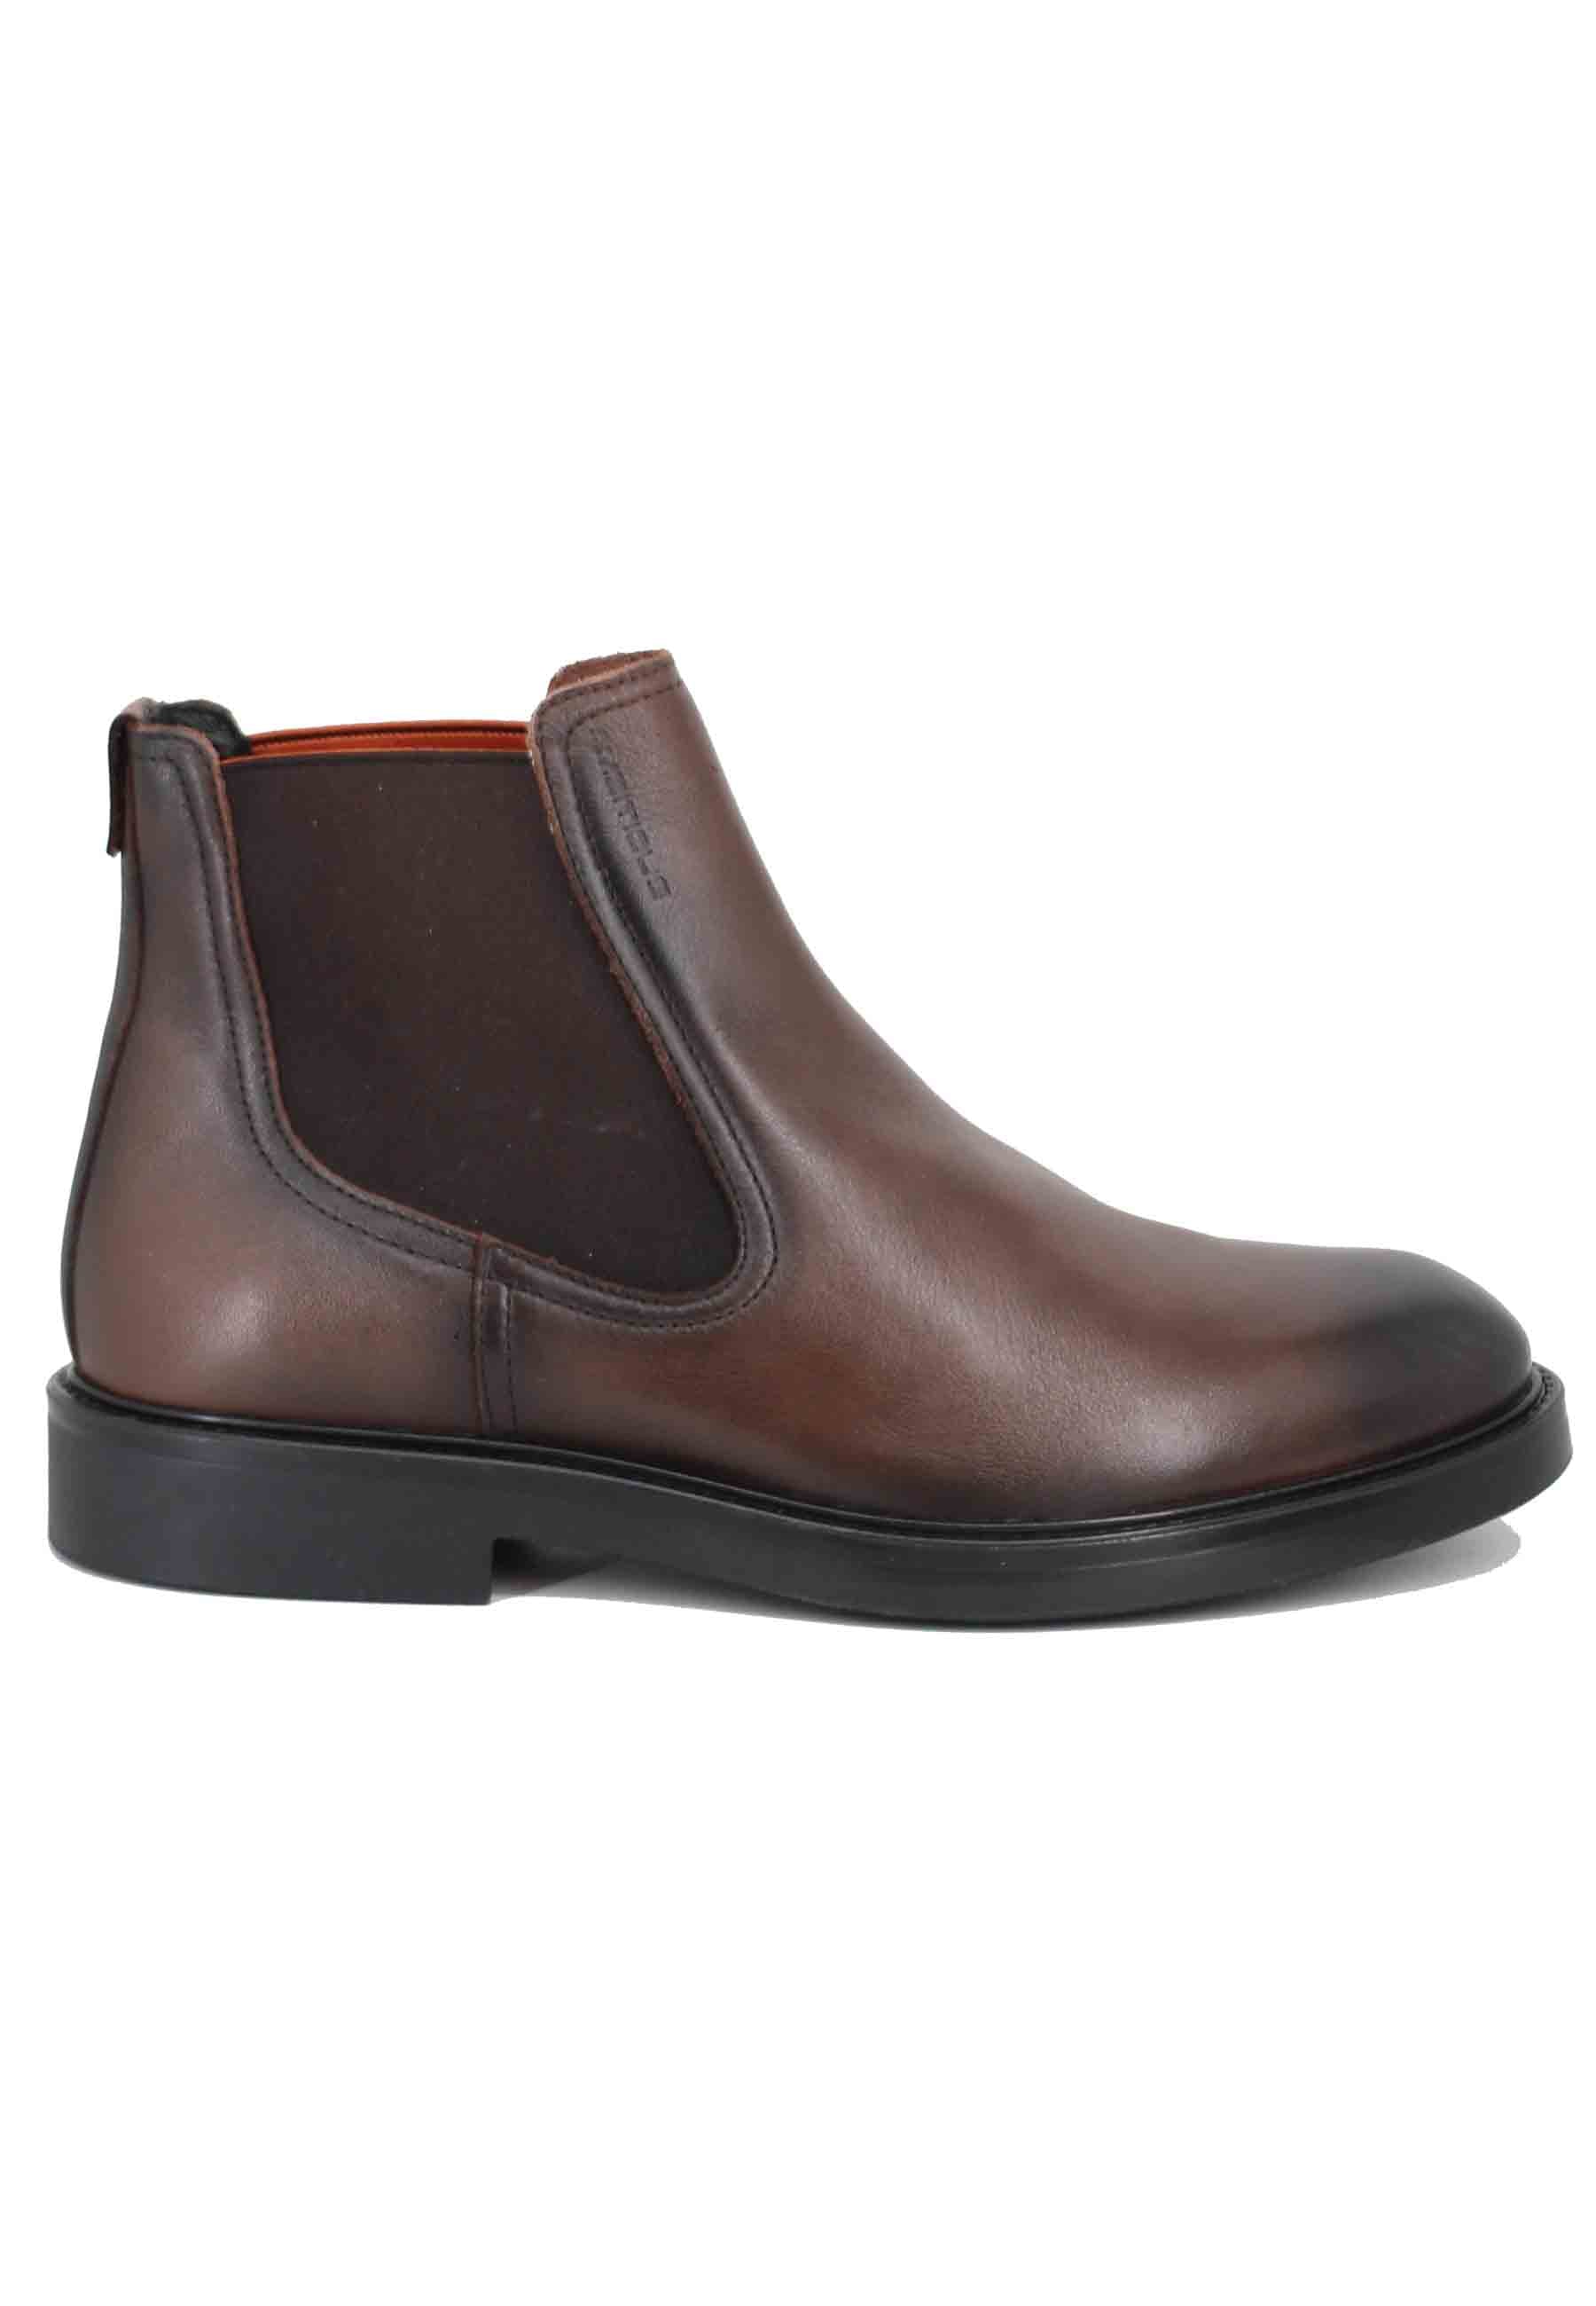 Brown leather men's ankle boots